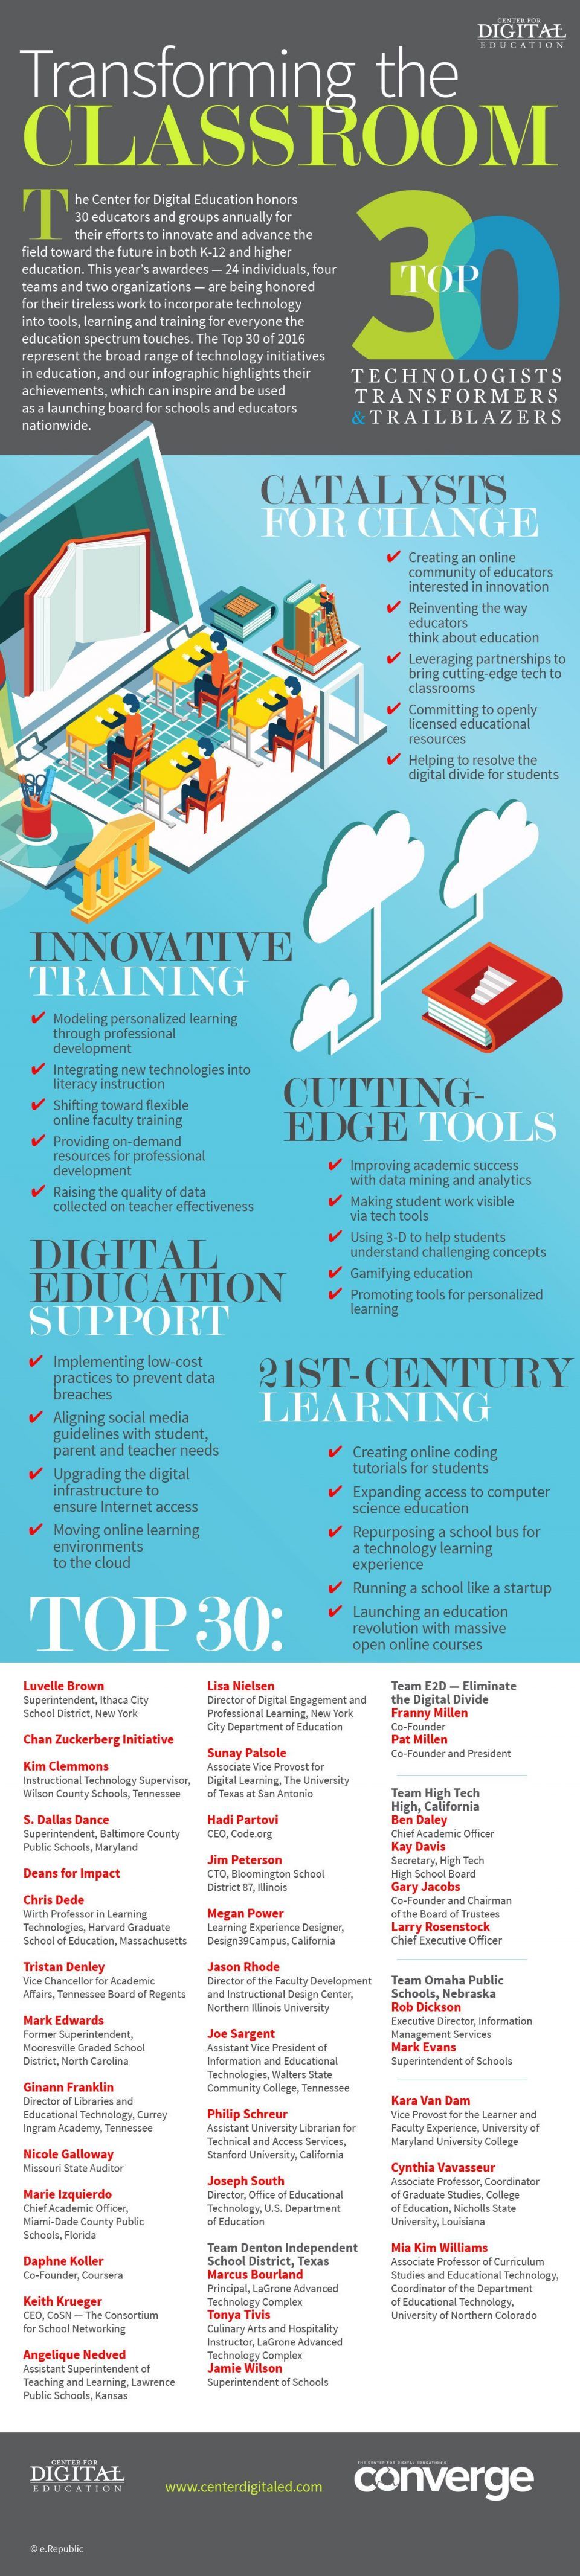 Using Tech to Transform the Classroom Infographic